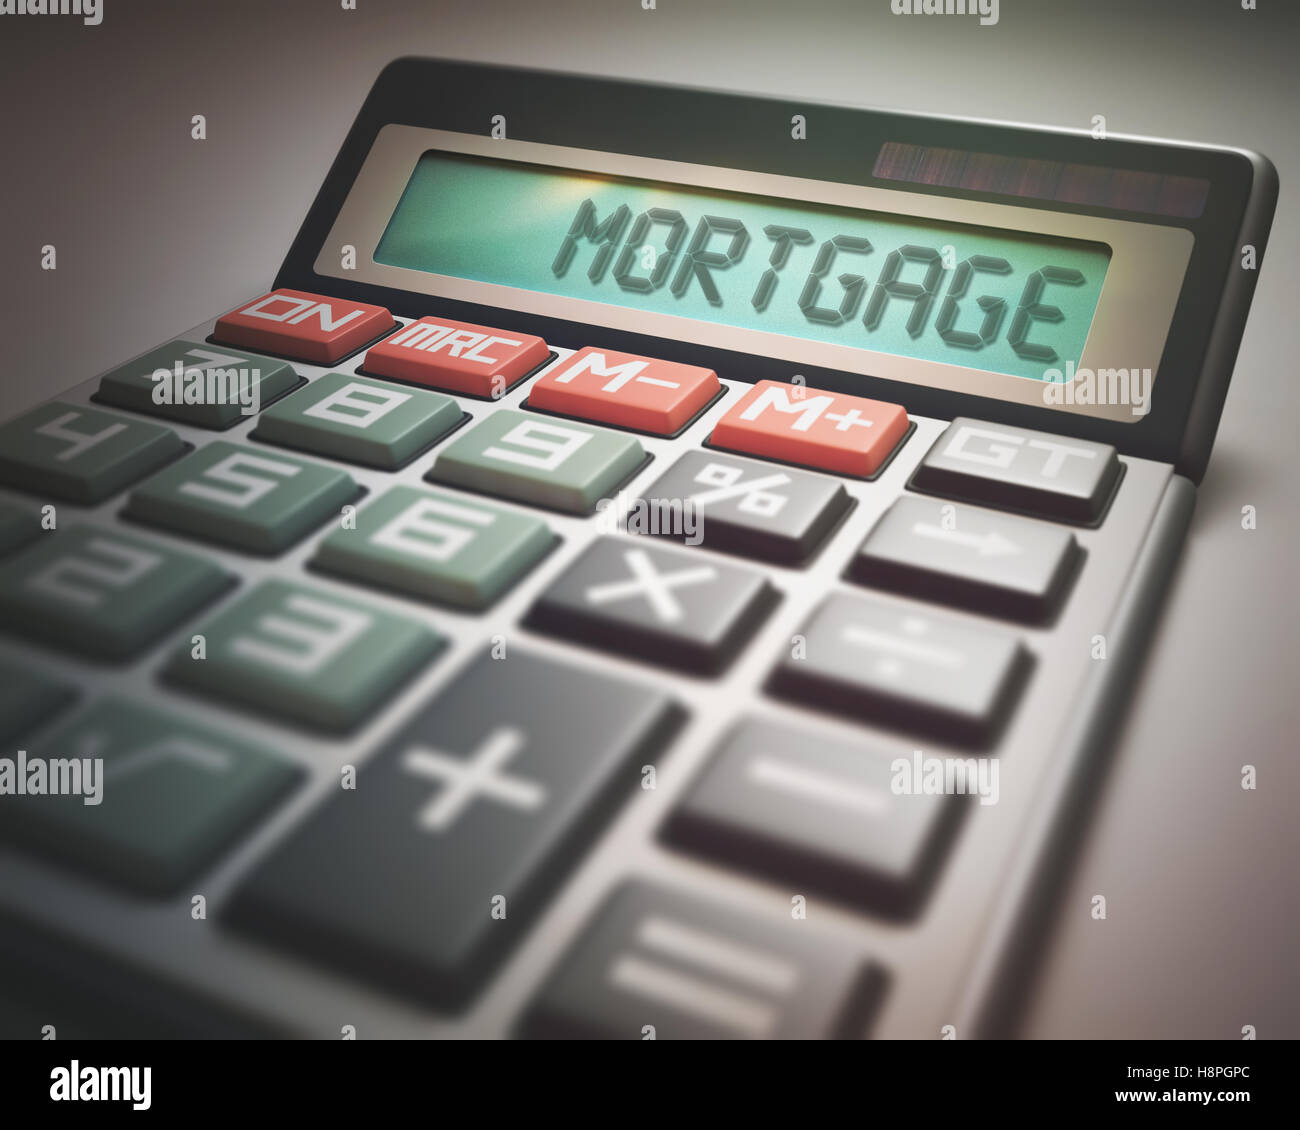 Solar calculator with the word MORTGAGE on the display. 3D illustration, concept image of Business and Finance. Stock Photo